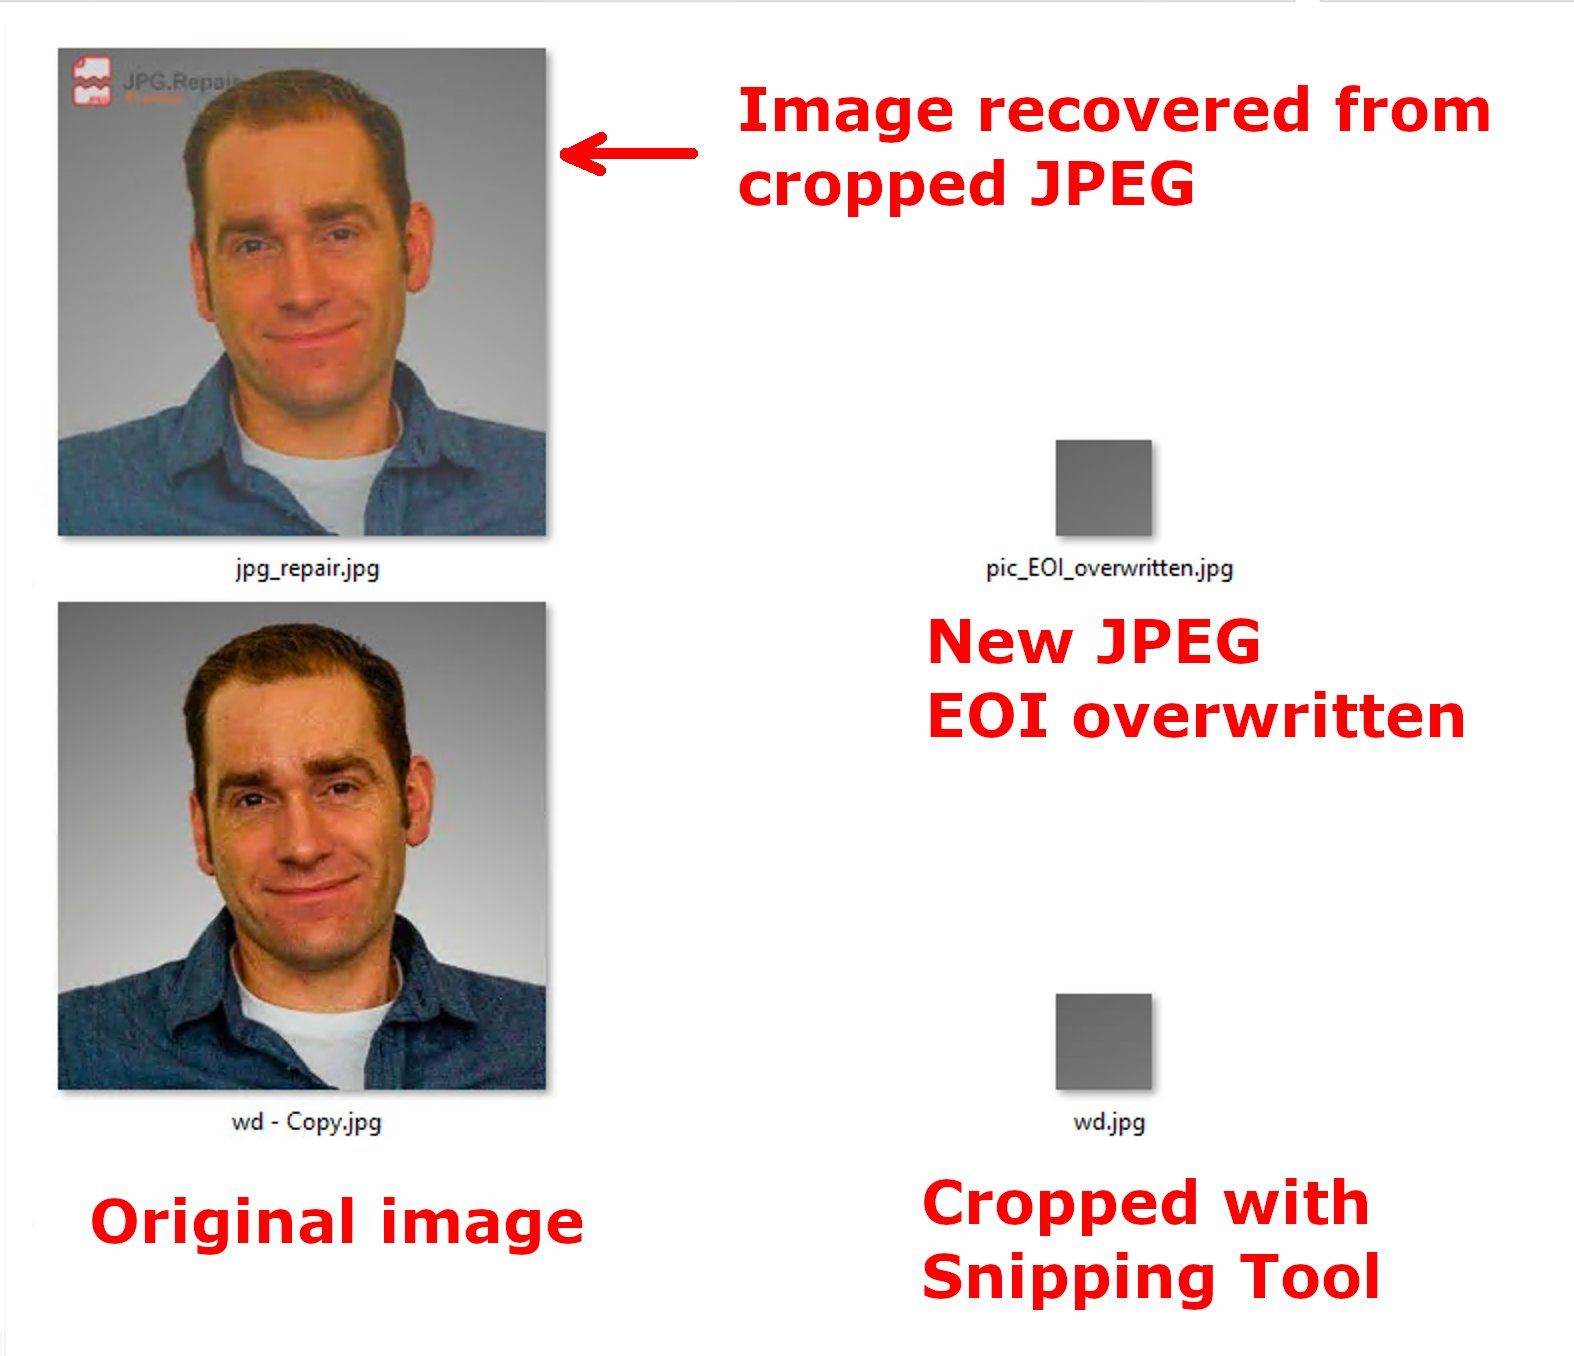 Demo of a cropped image being recovered